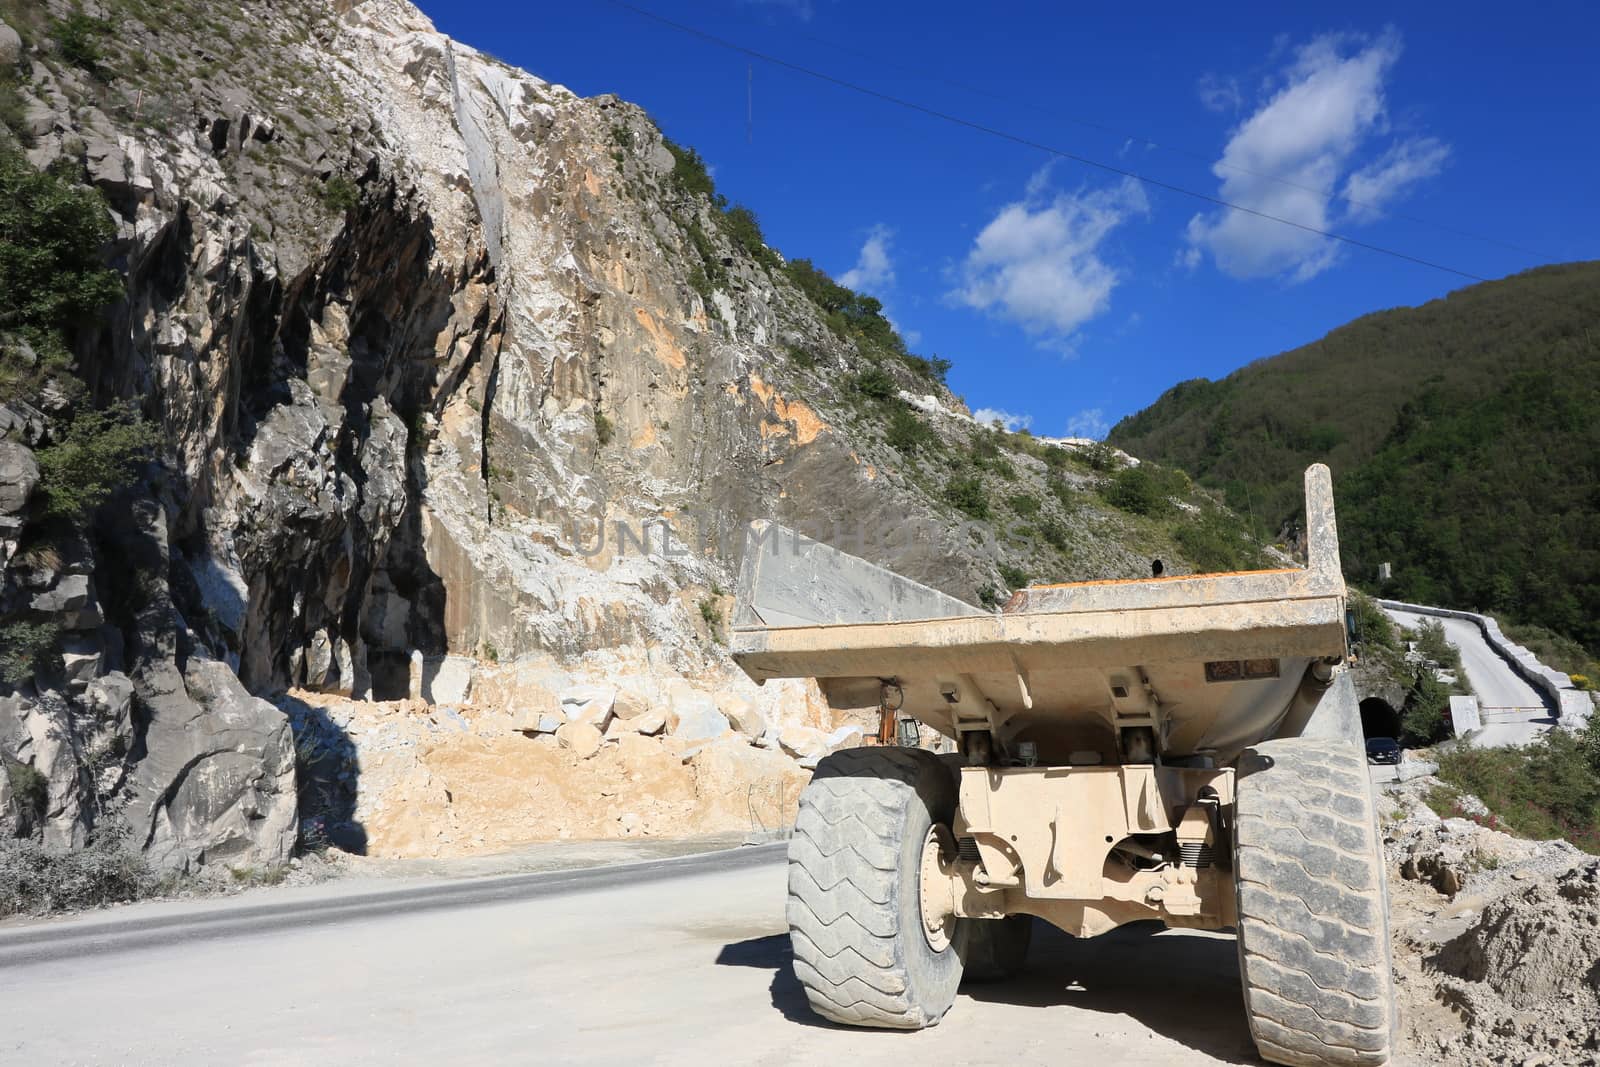 A dumper truck used in a Carrara marble quarry. Large yellow dum by Paolo_Grassi